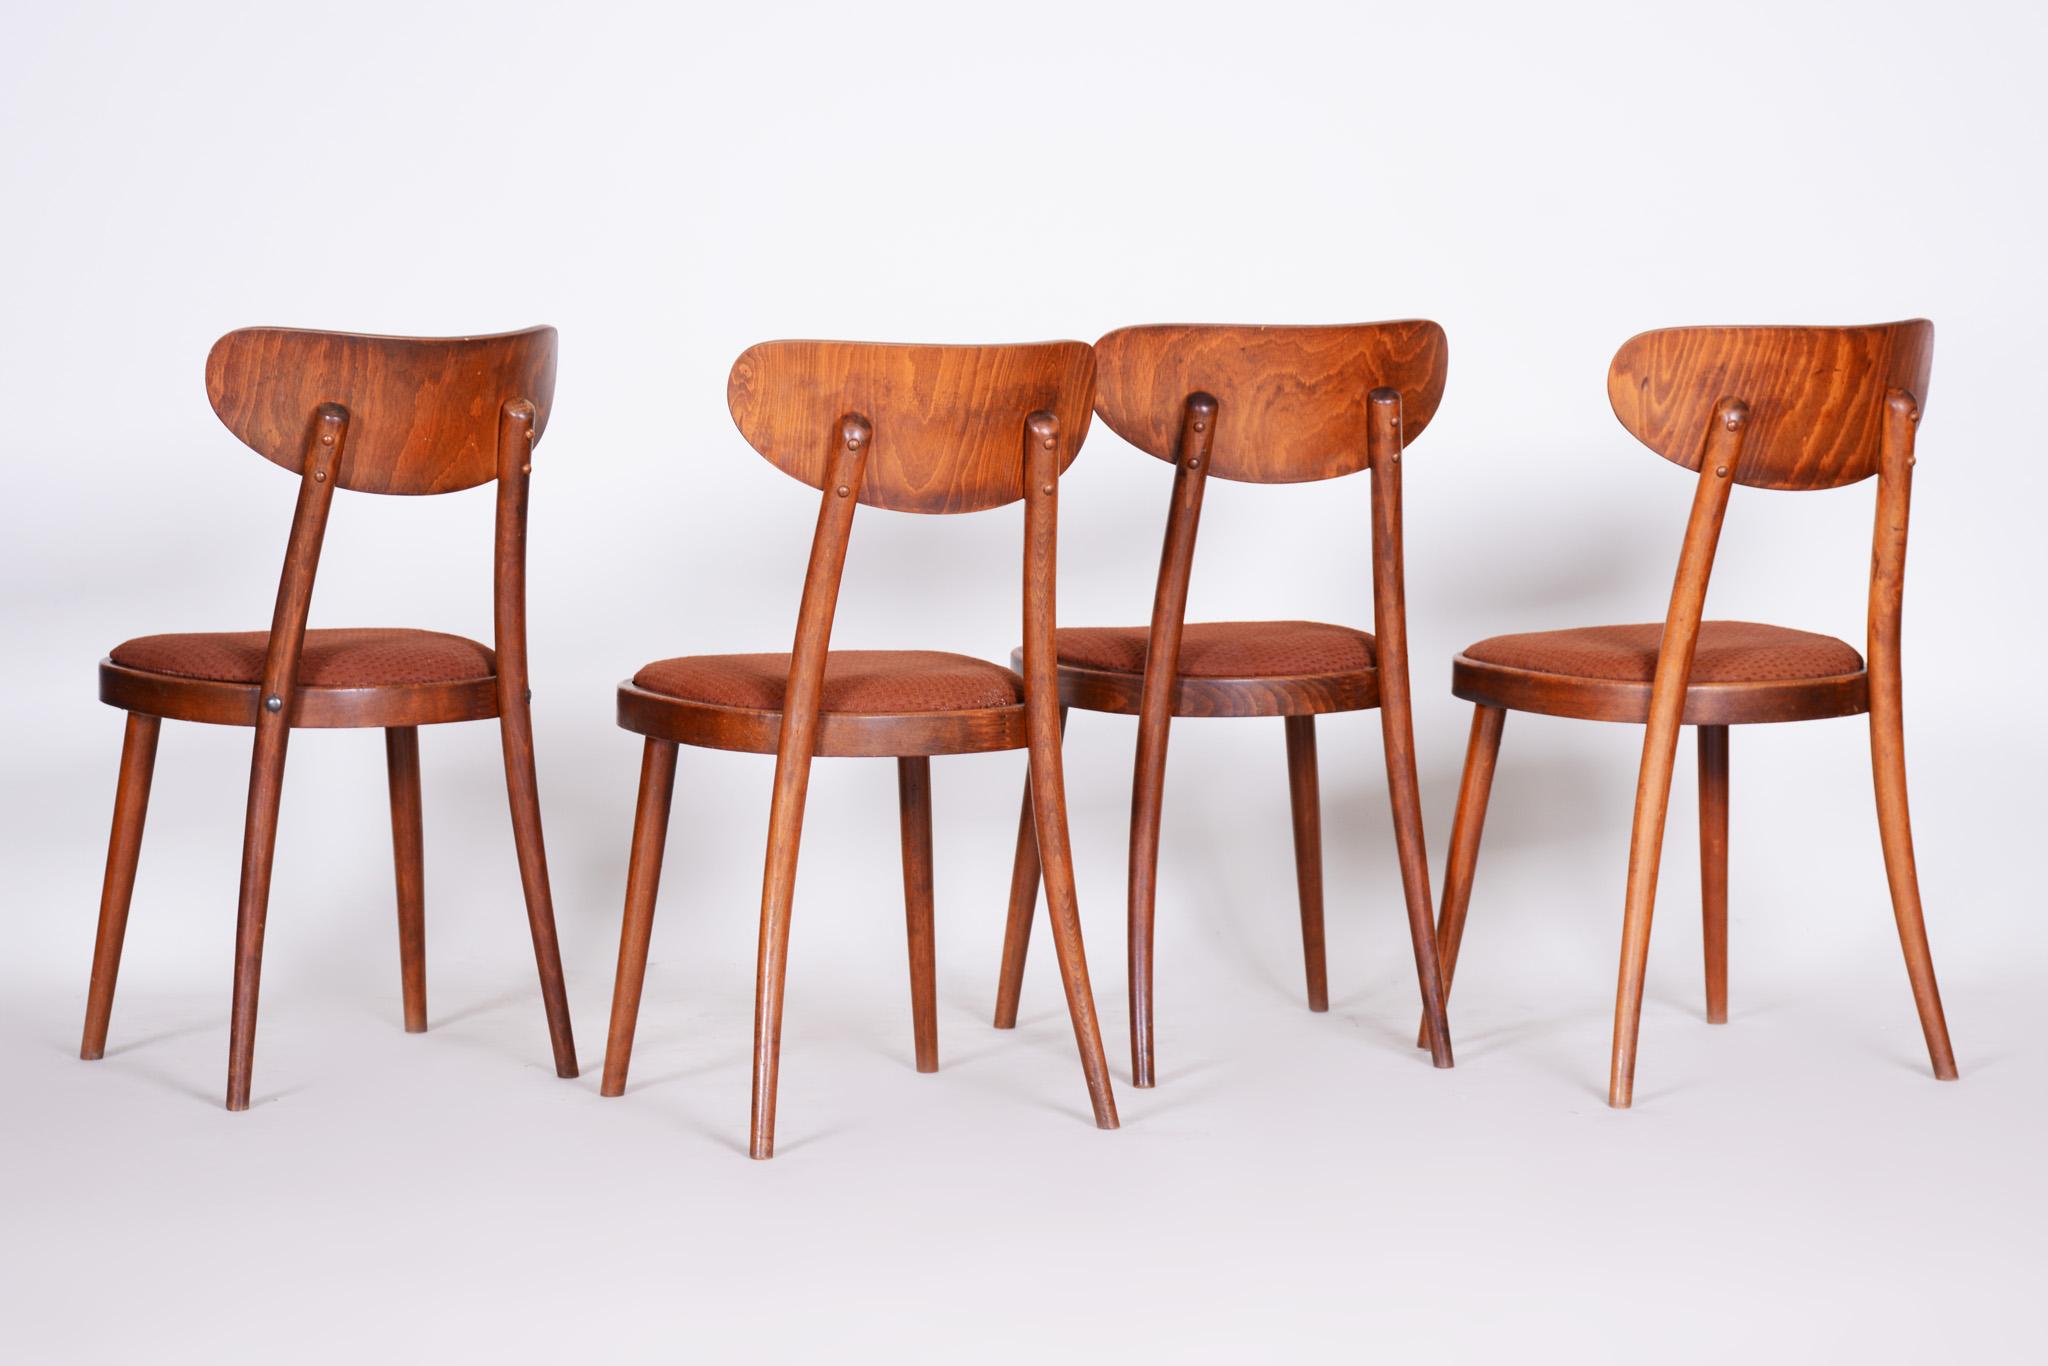 Fabric Czech Brown Beech Midcentury Chairs, 4 Pieces, 1940s, Well Preserved Condition